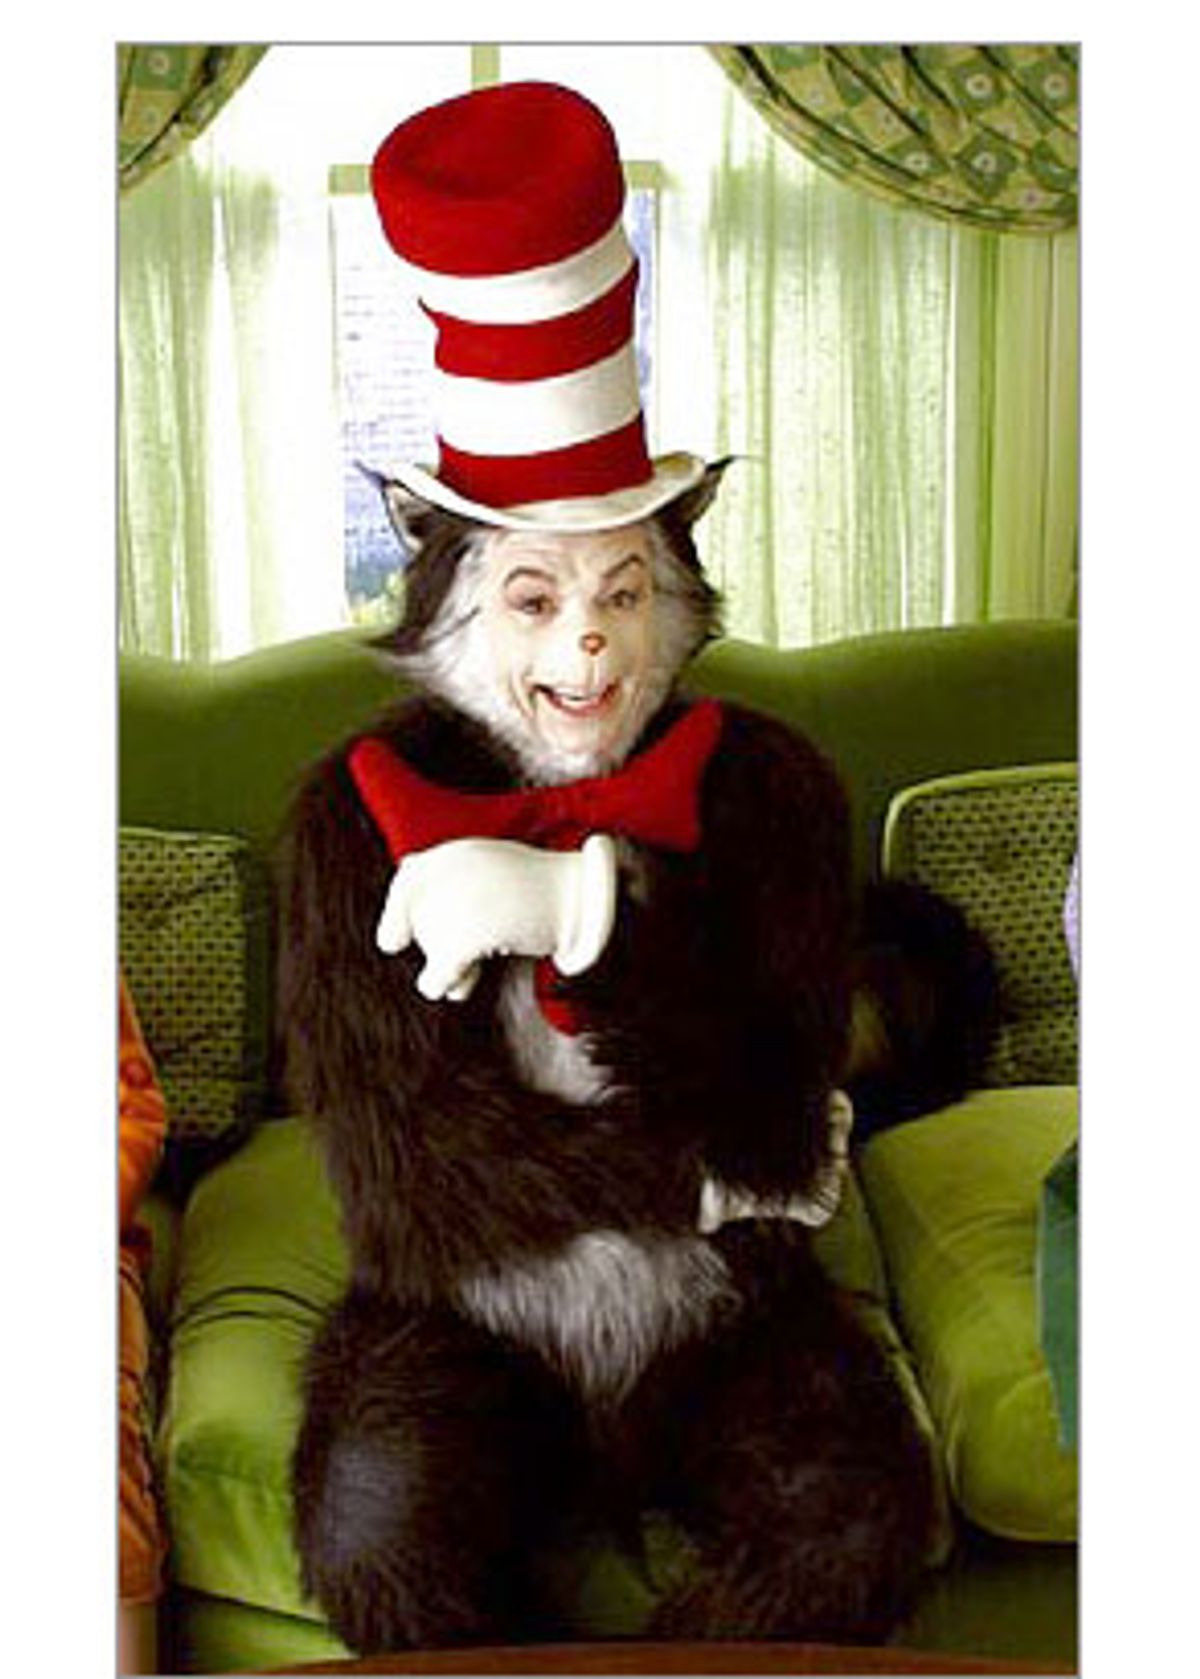 The Cat in the Hat Unpopular Movie Opinions That Shouldn't Be